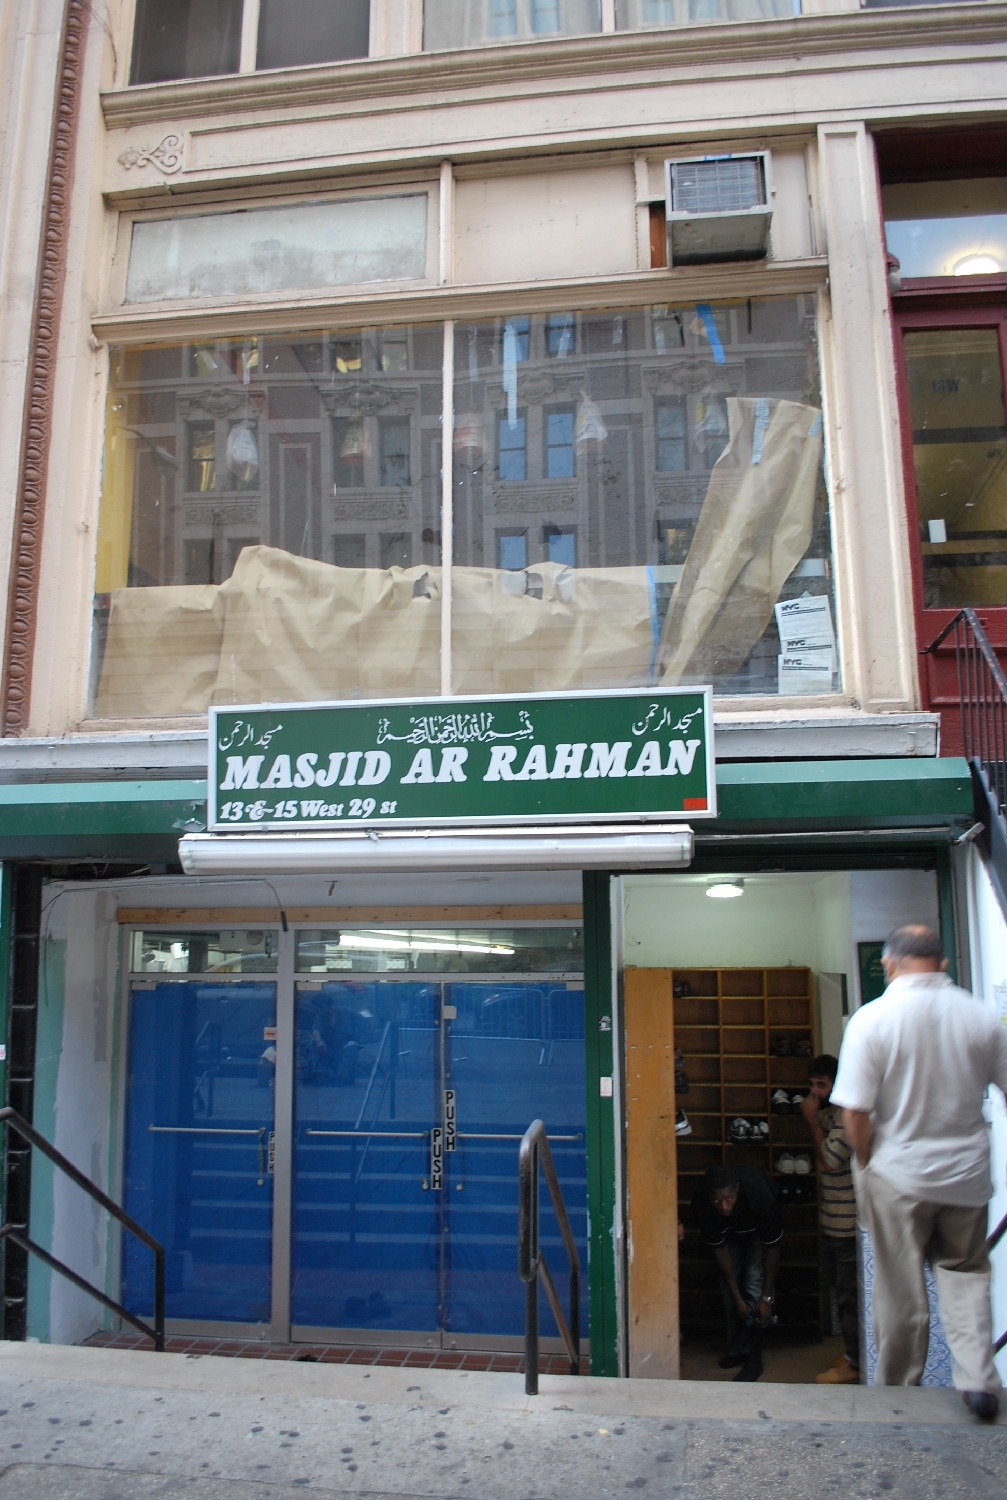 Men's entrance, showing situation of the mosque below a restaurant